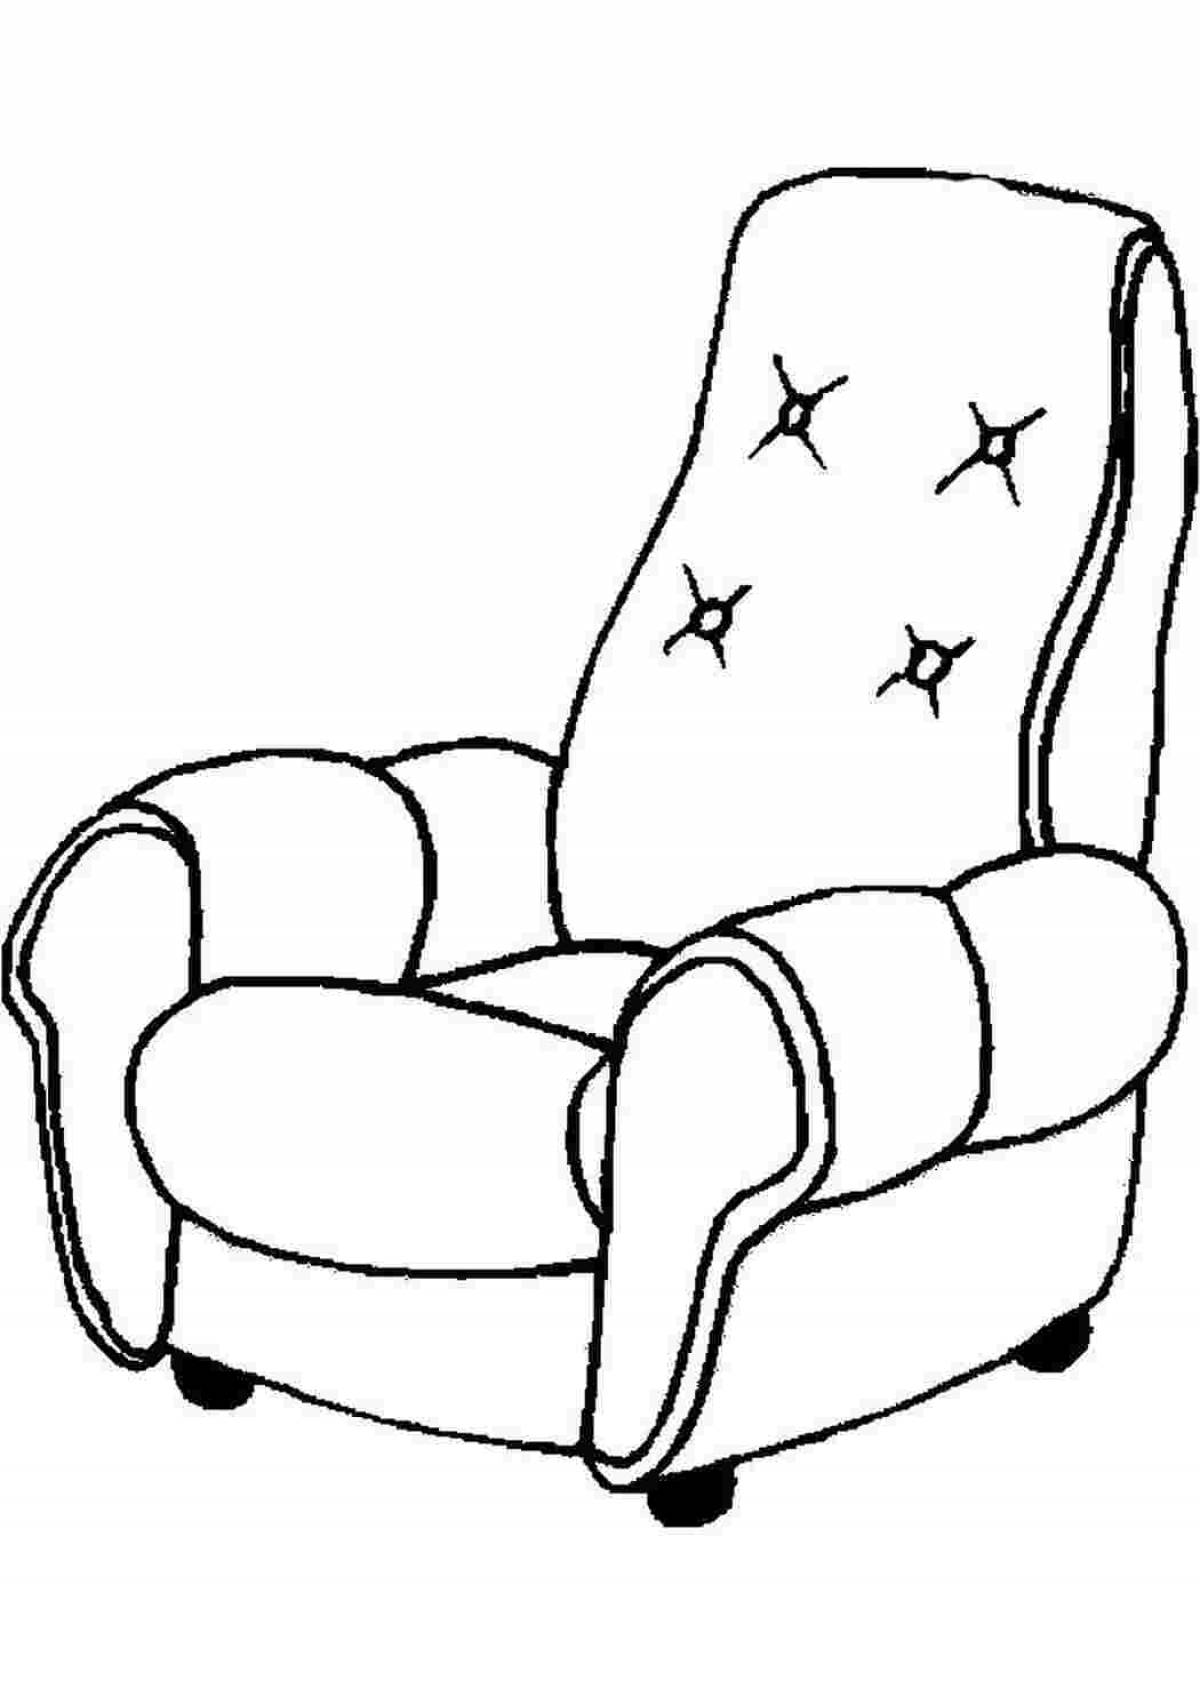 Coloring book fashion chair for children